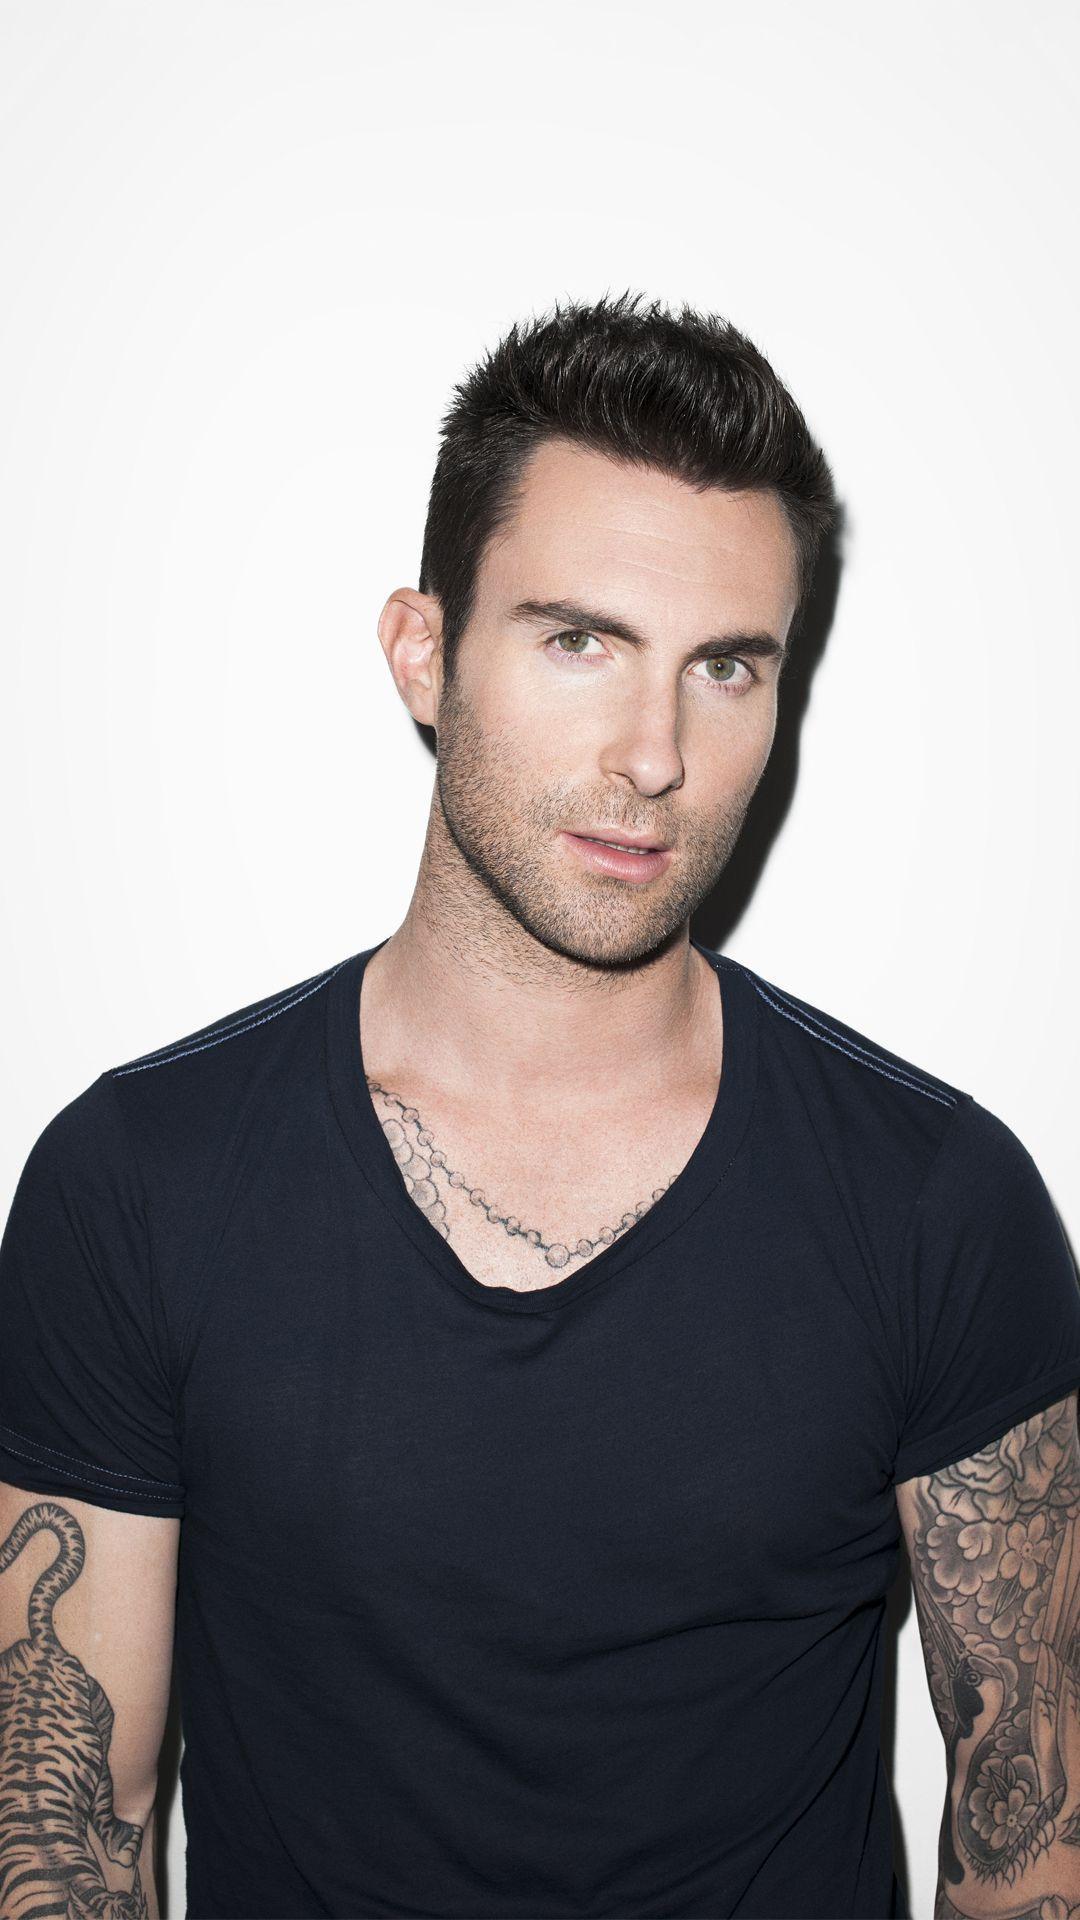 Adam Levine Maroon5 htc one wallpaper, free and easy to